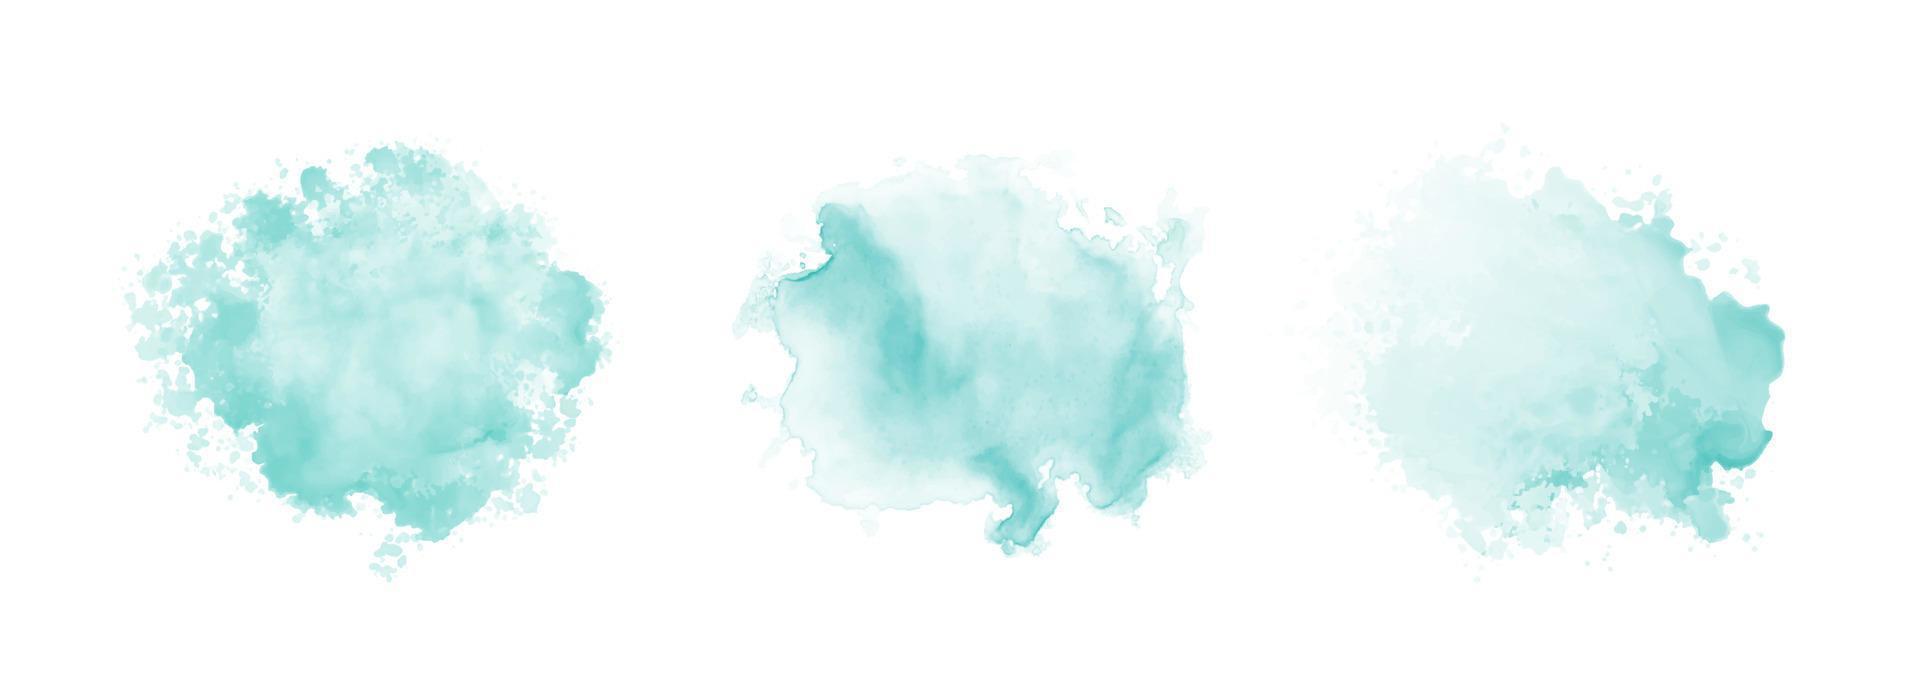 Set of abstract mint green watercolor water splash on a white background vector